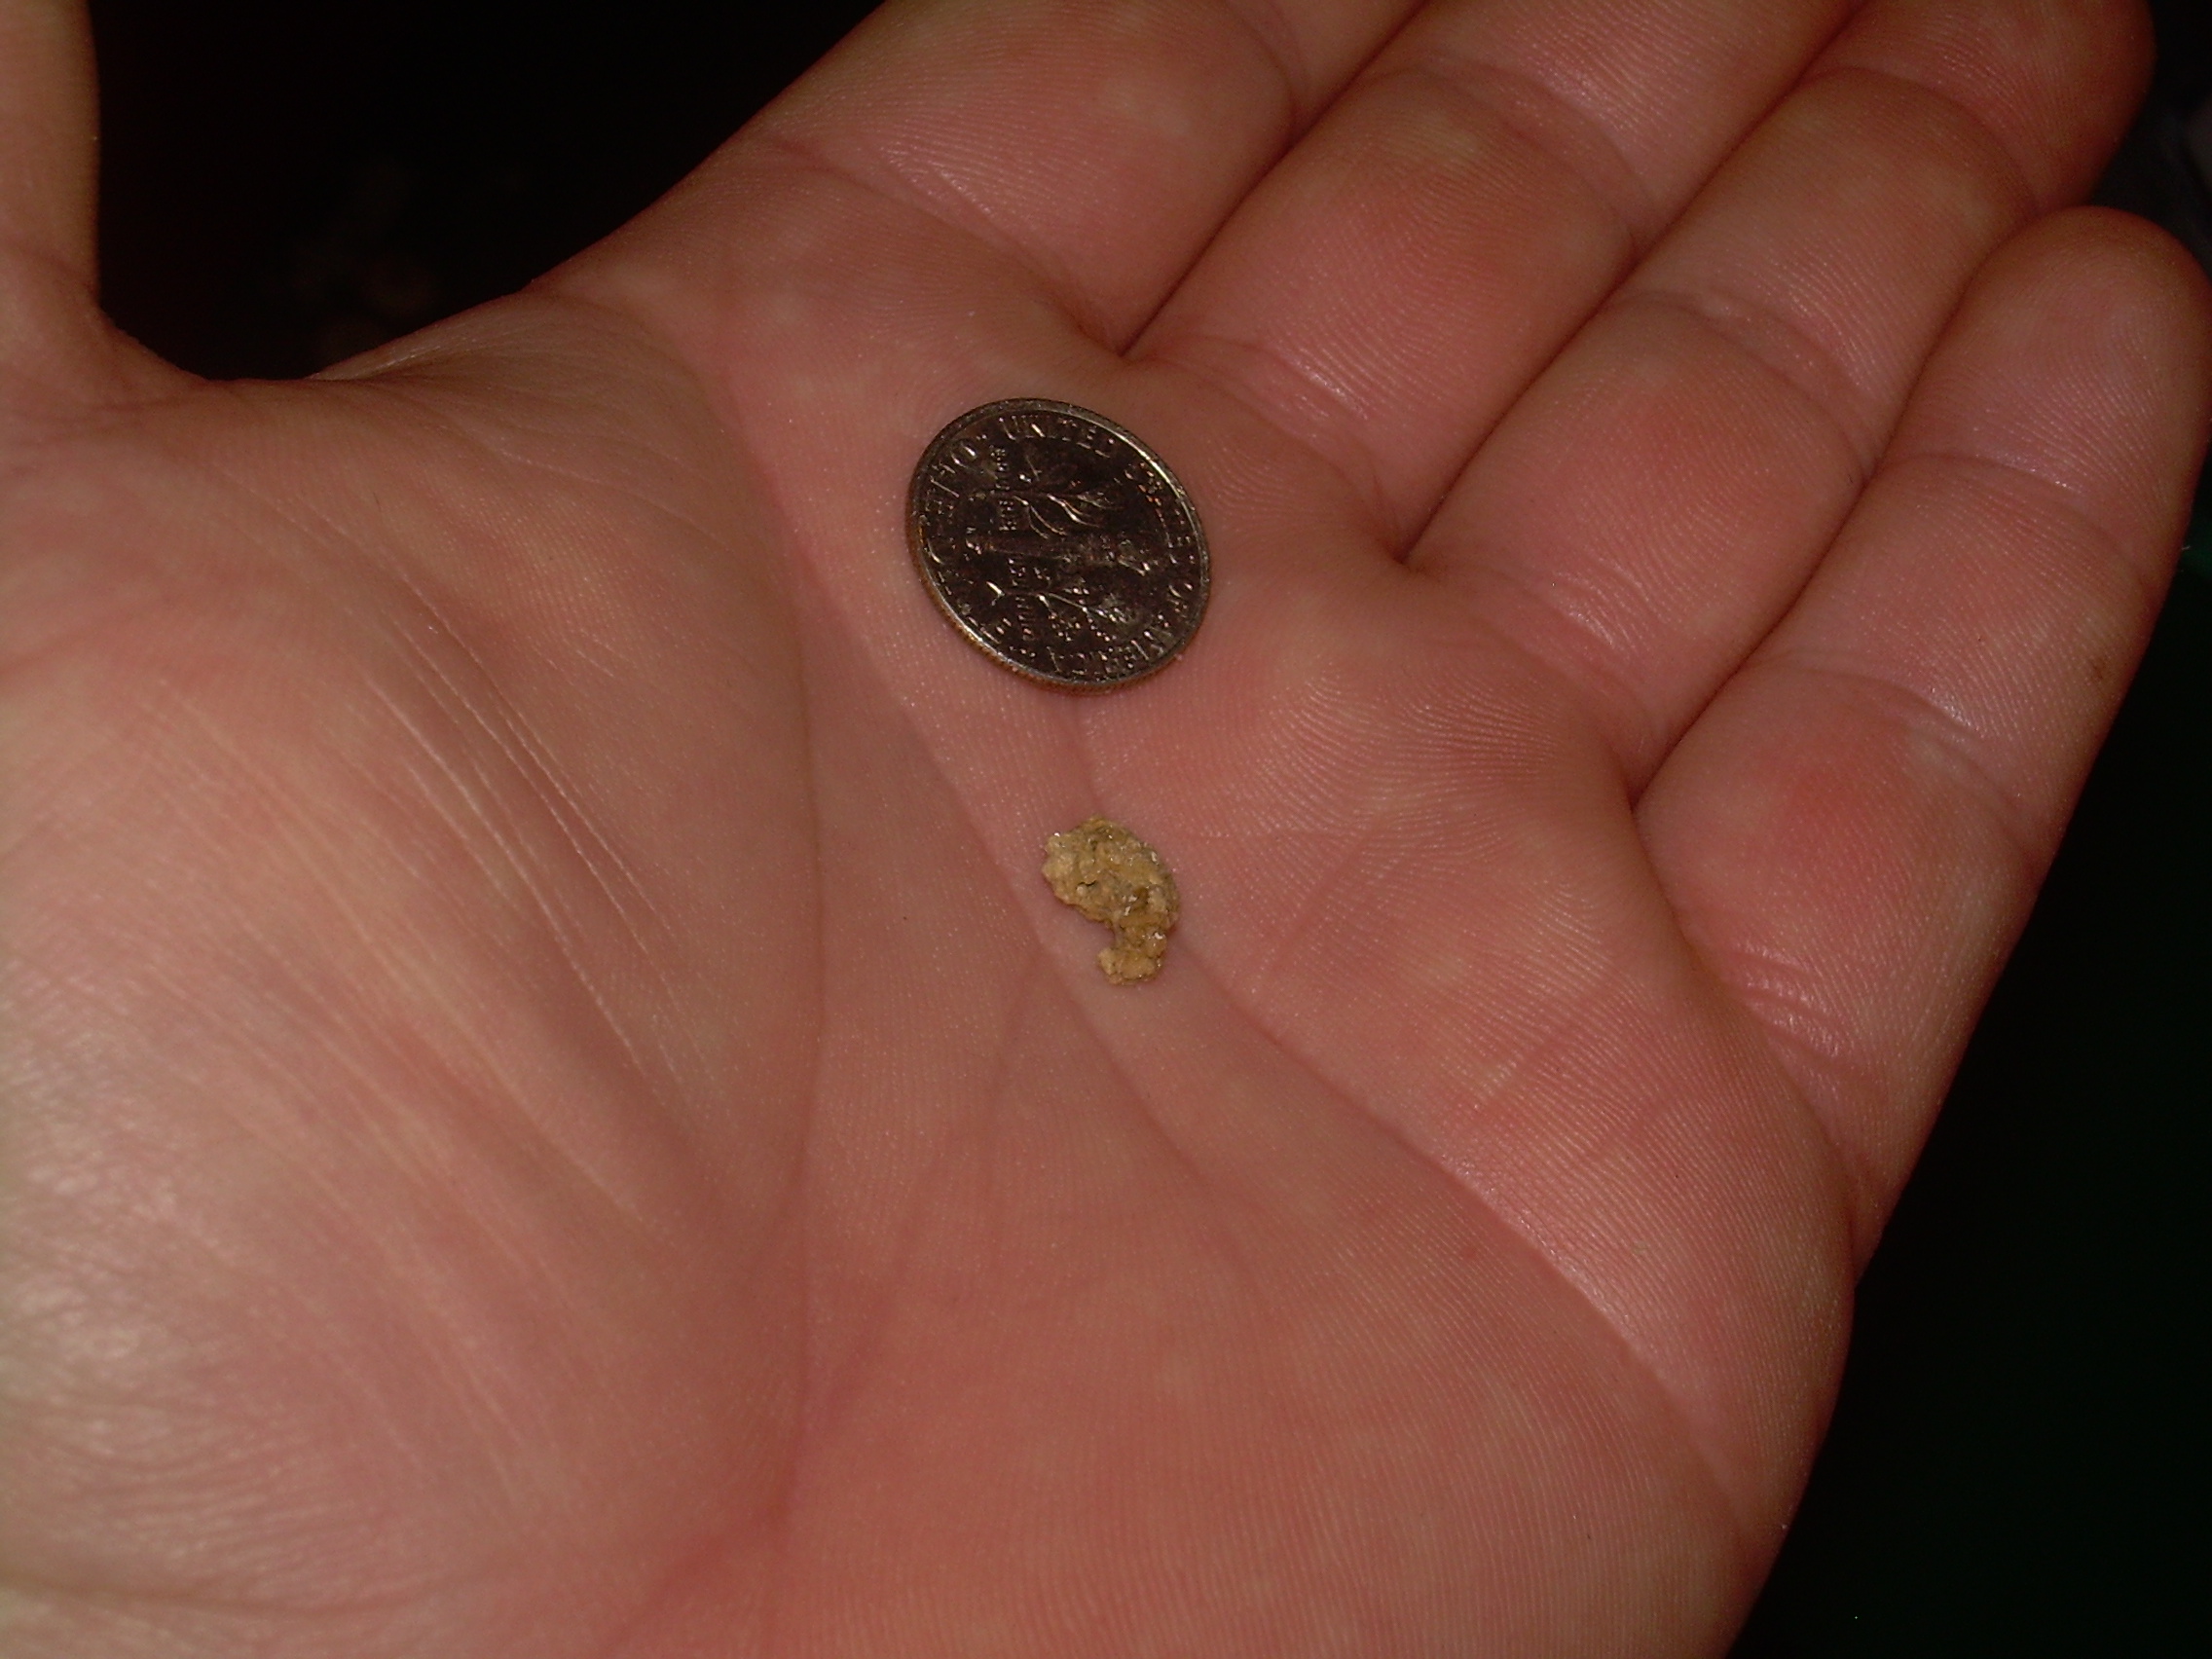 One HUGE kidney stone! 11mm x 7mm x 5mm and I passed it ...